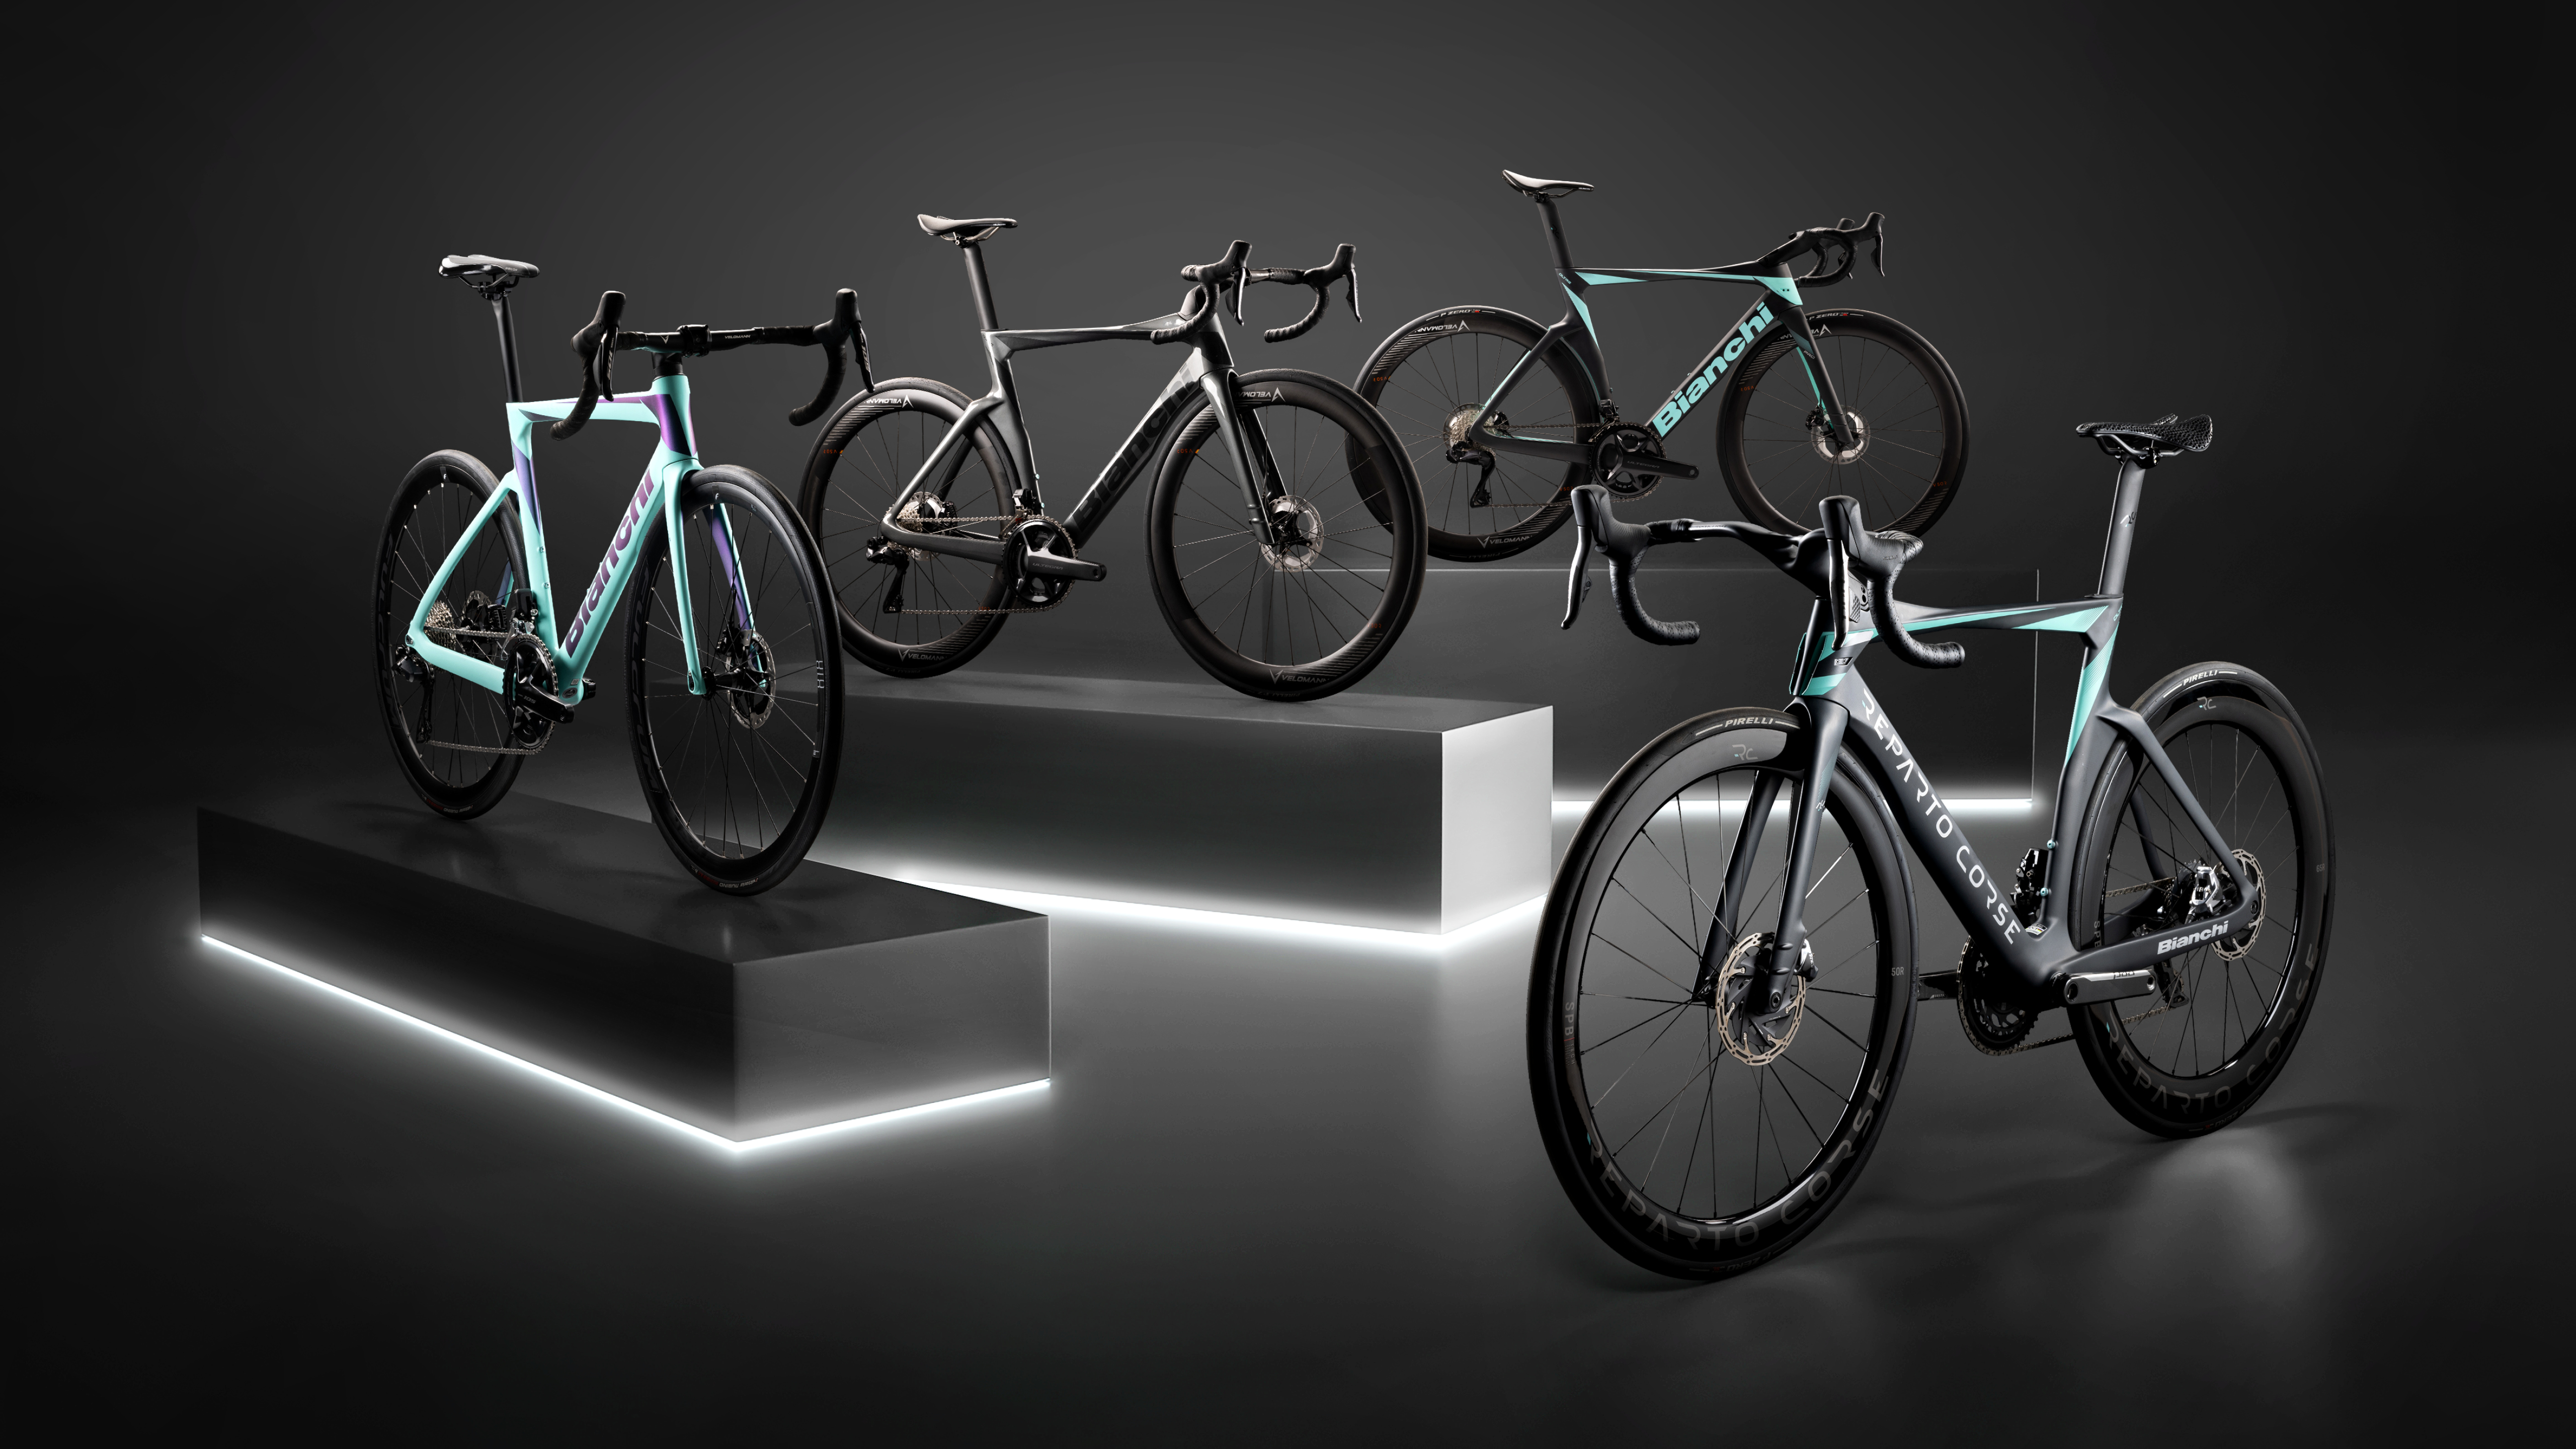 Bianchi Performance bicycles since 1885